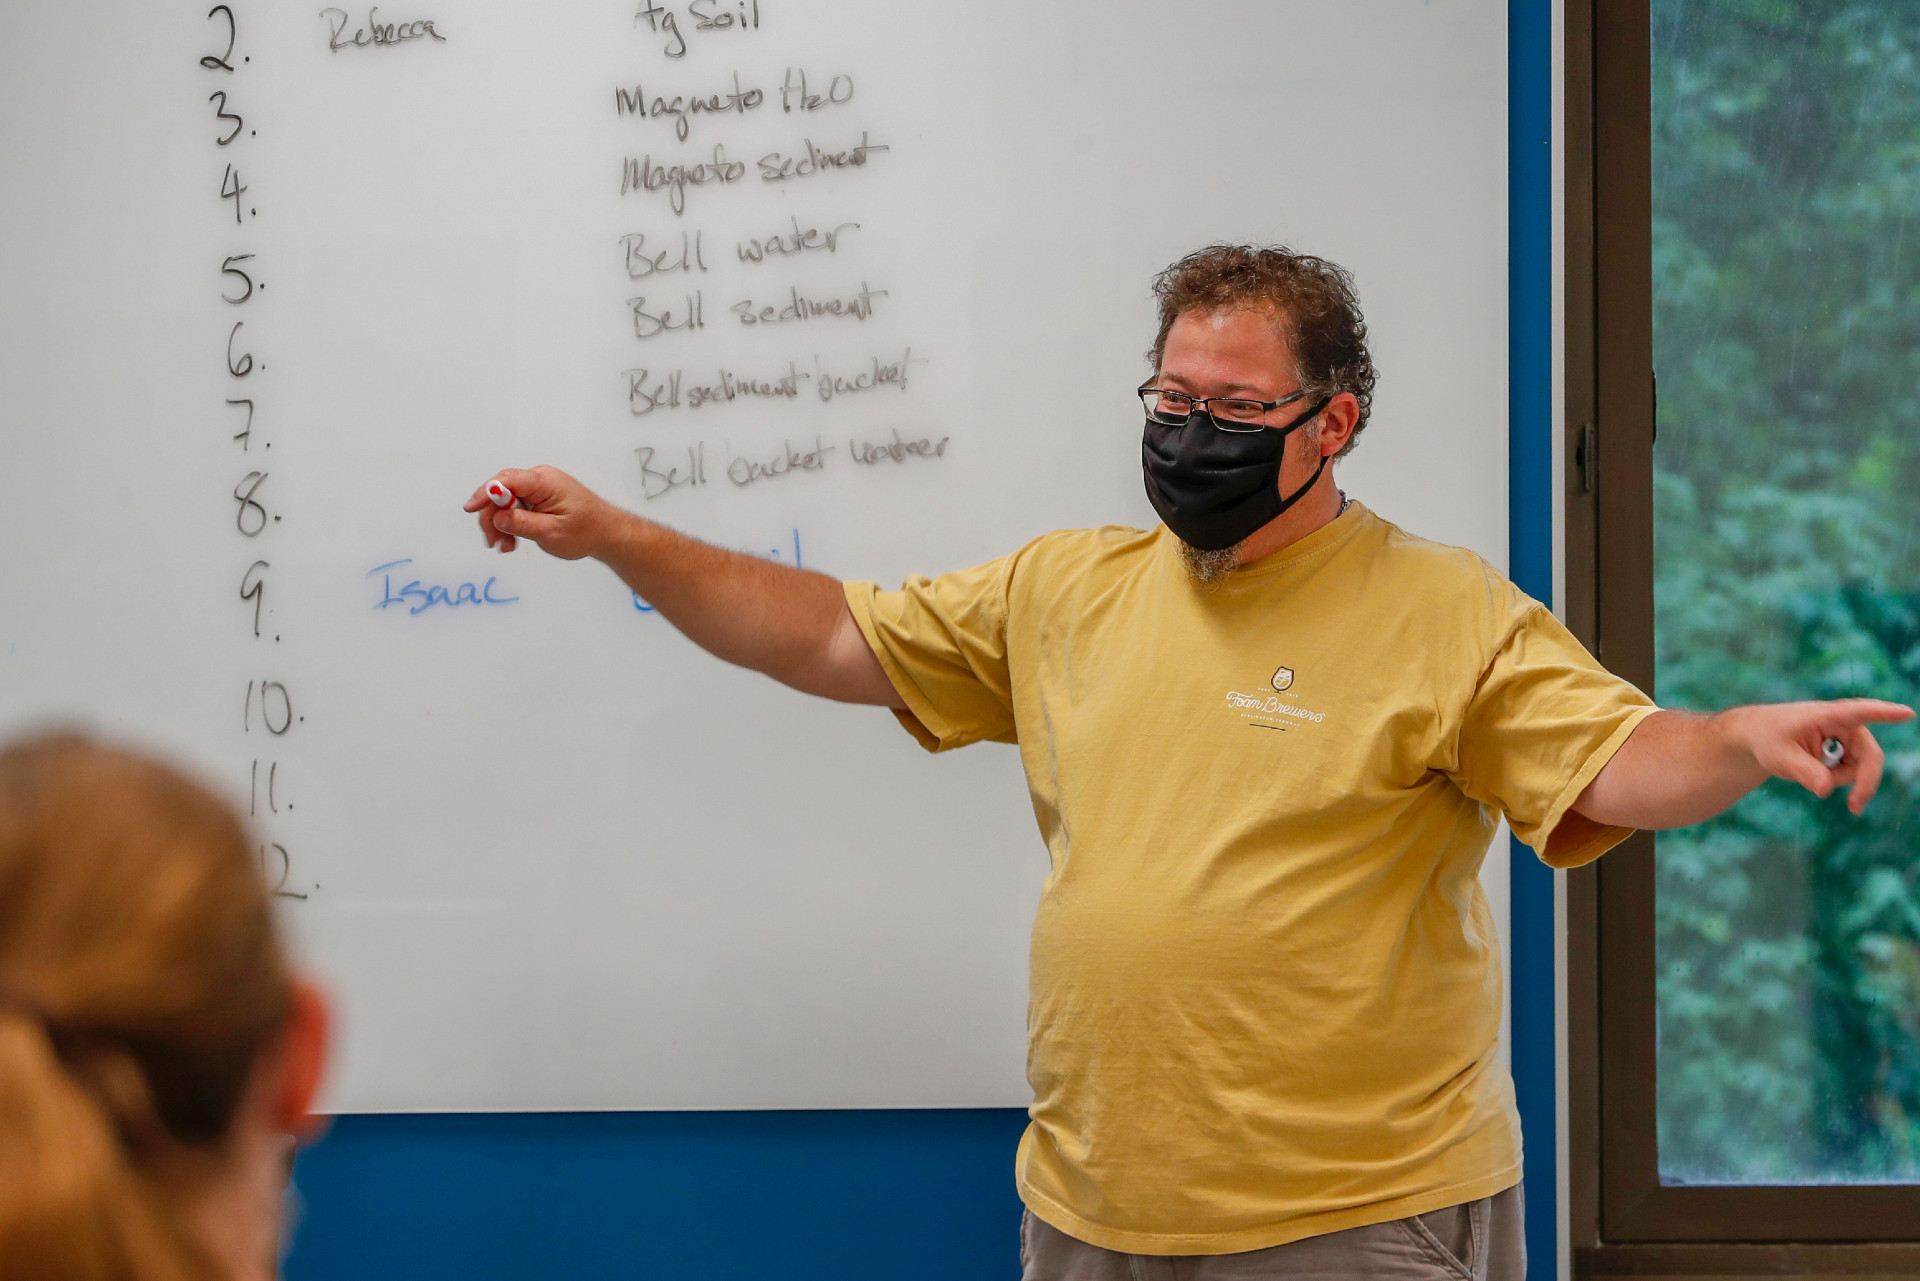 An instructor teaches while wearing a face mask